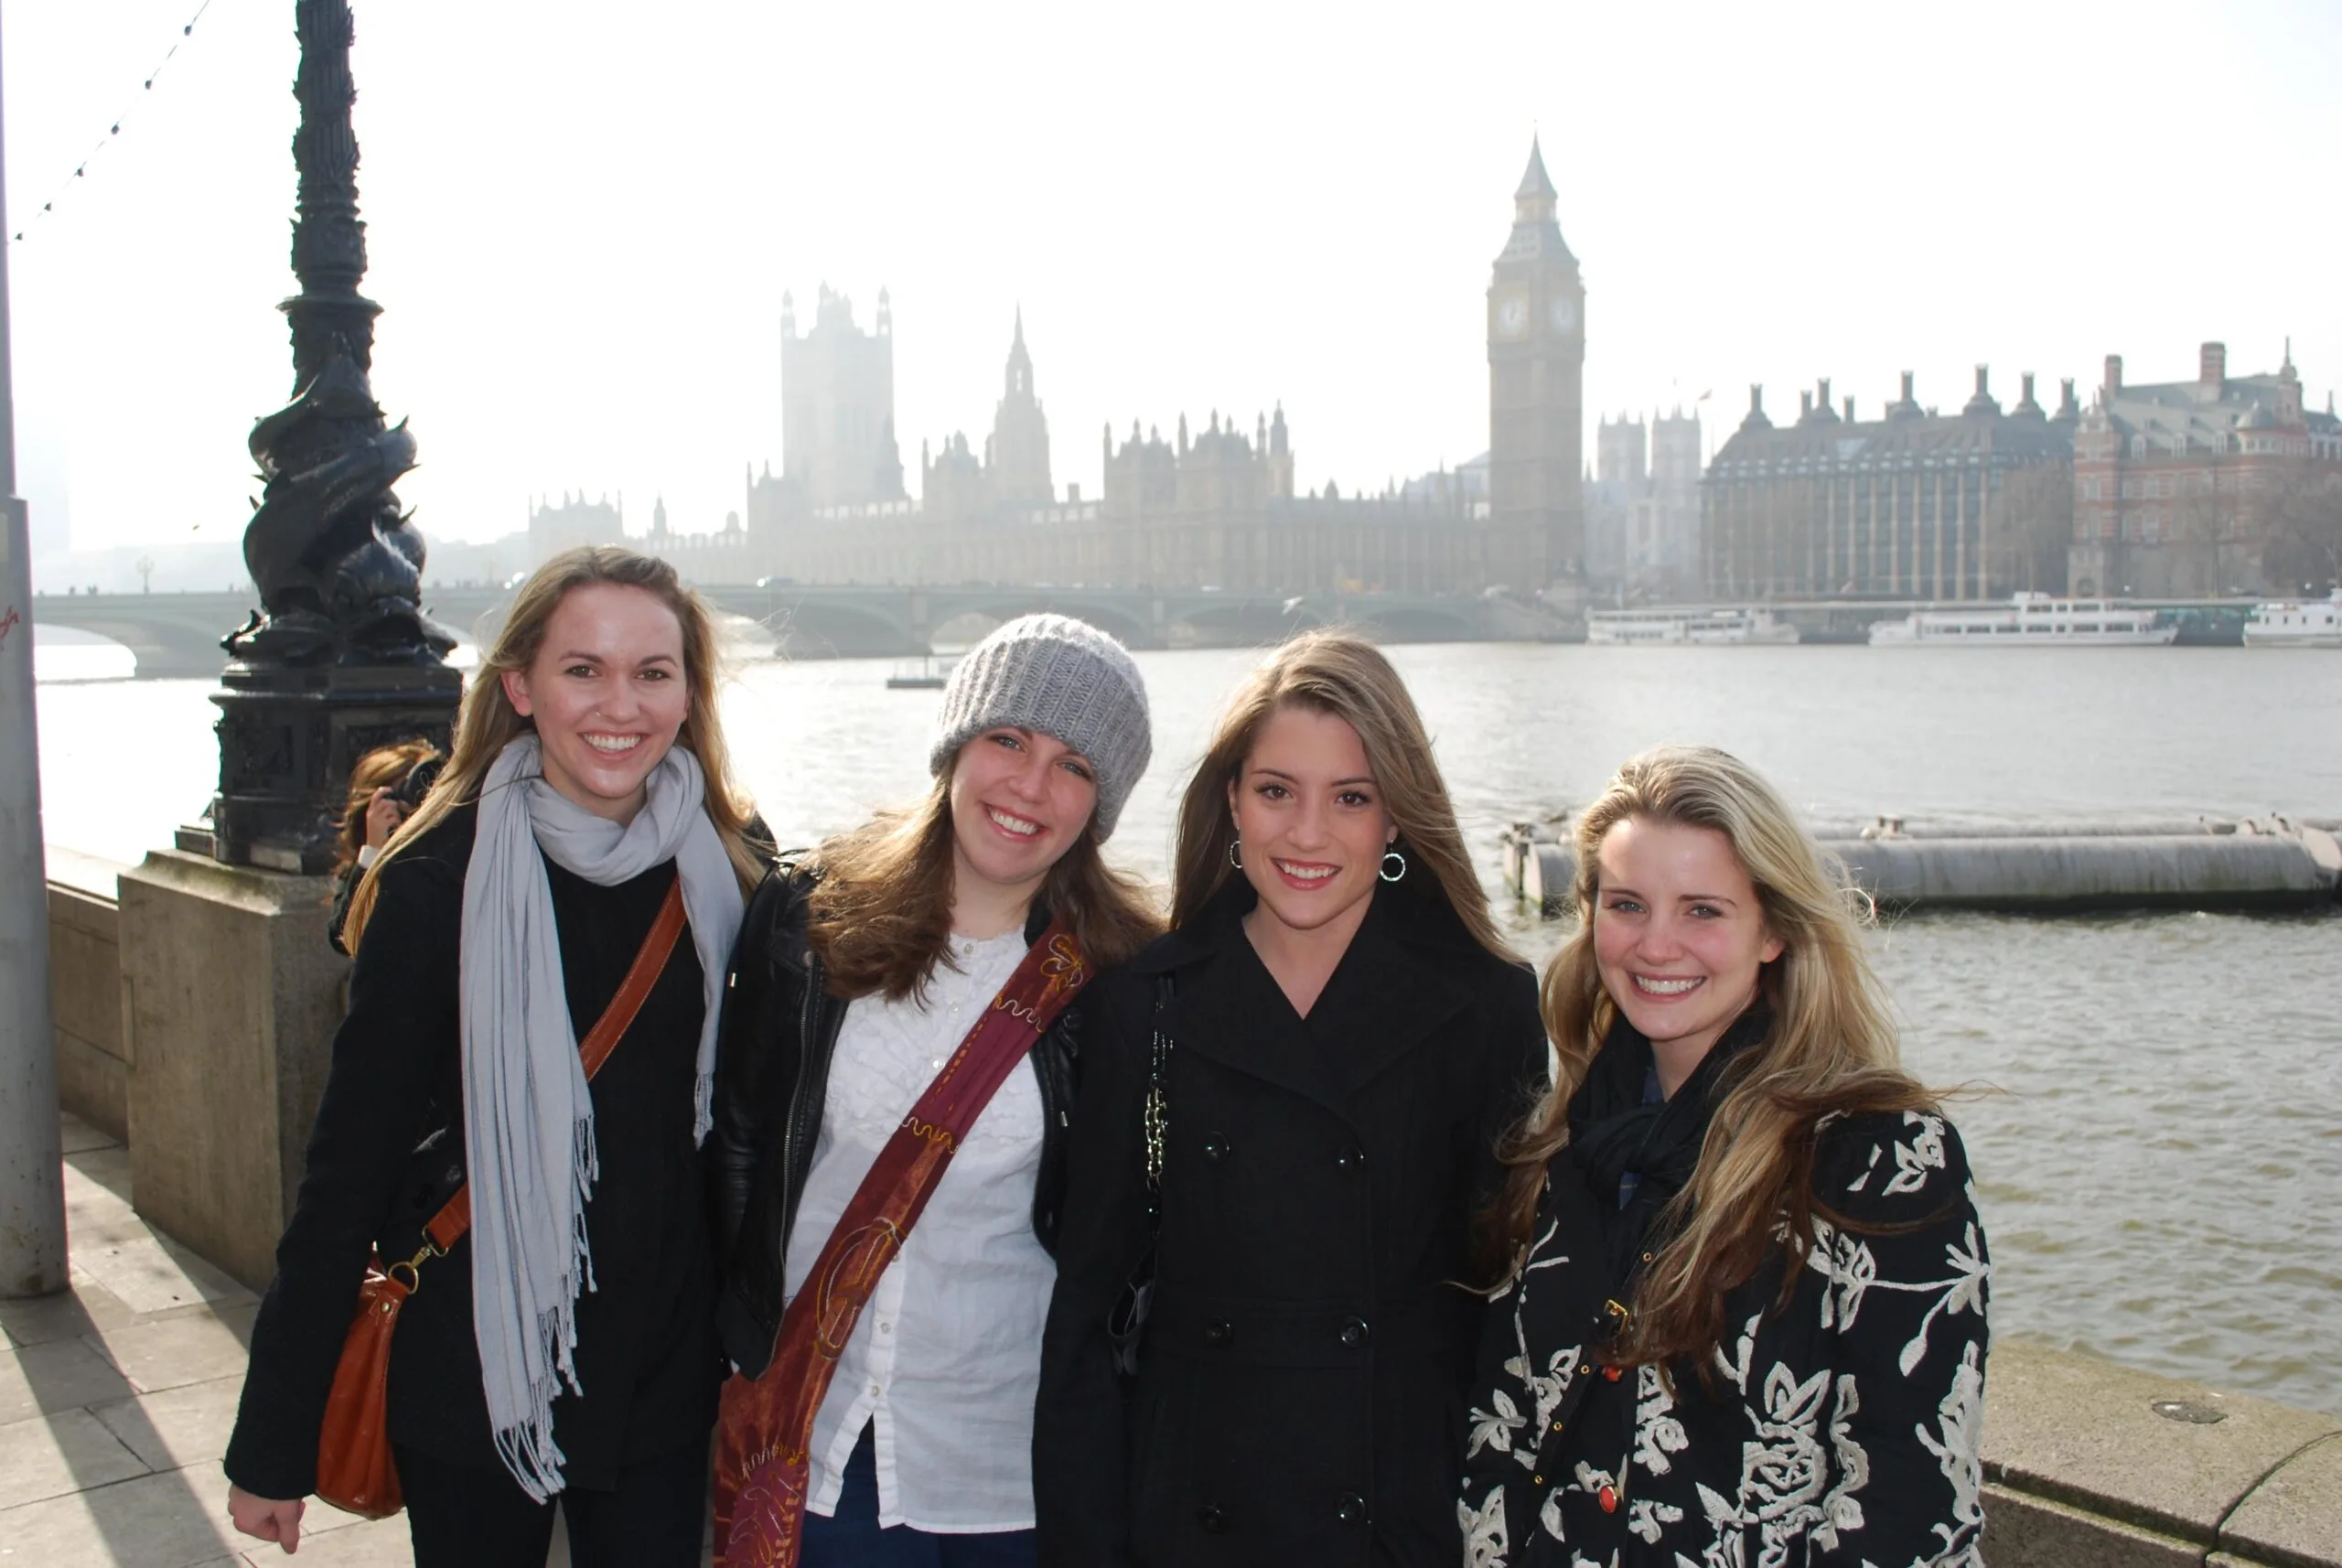 Four students smiling at the camera with London, England in the background.